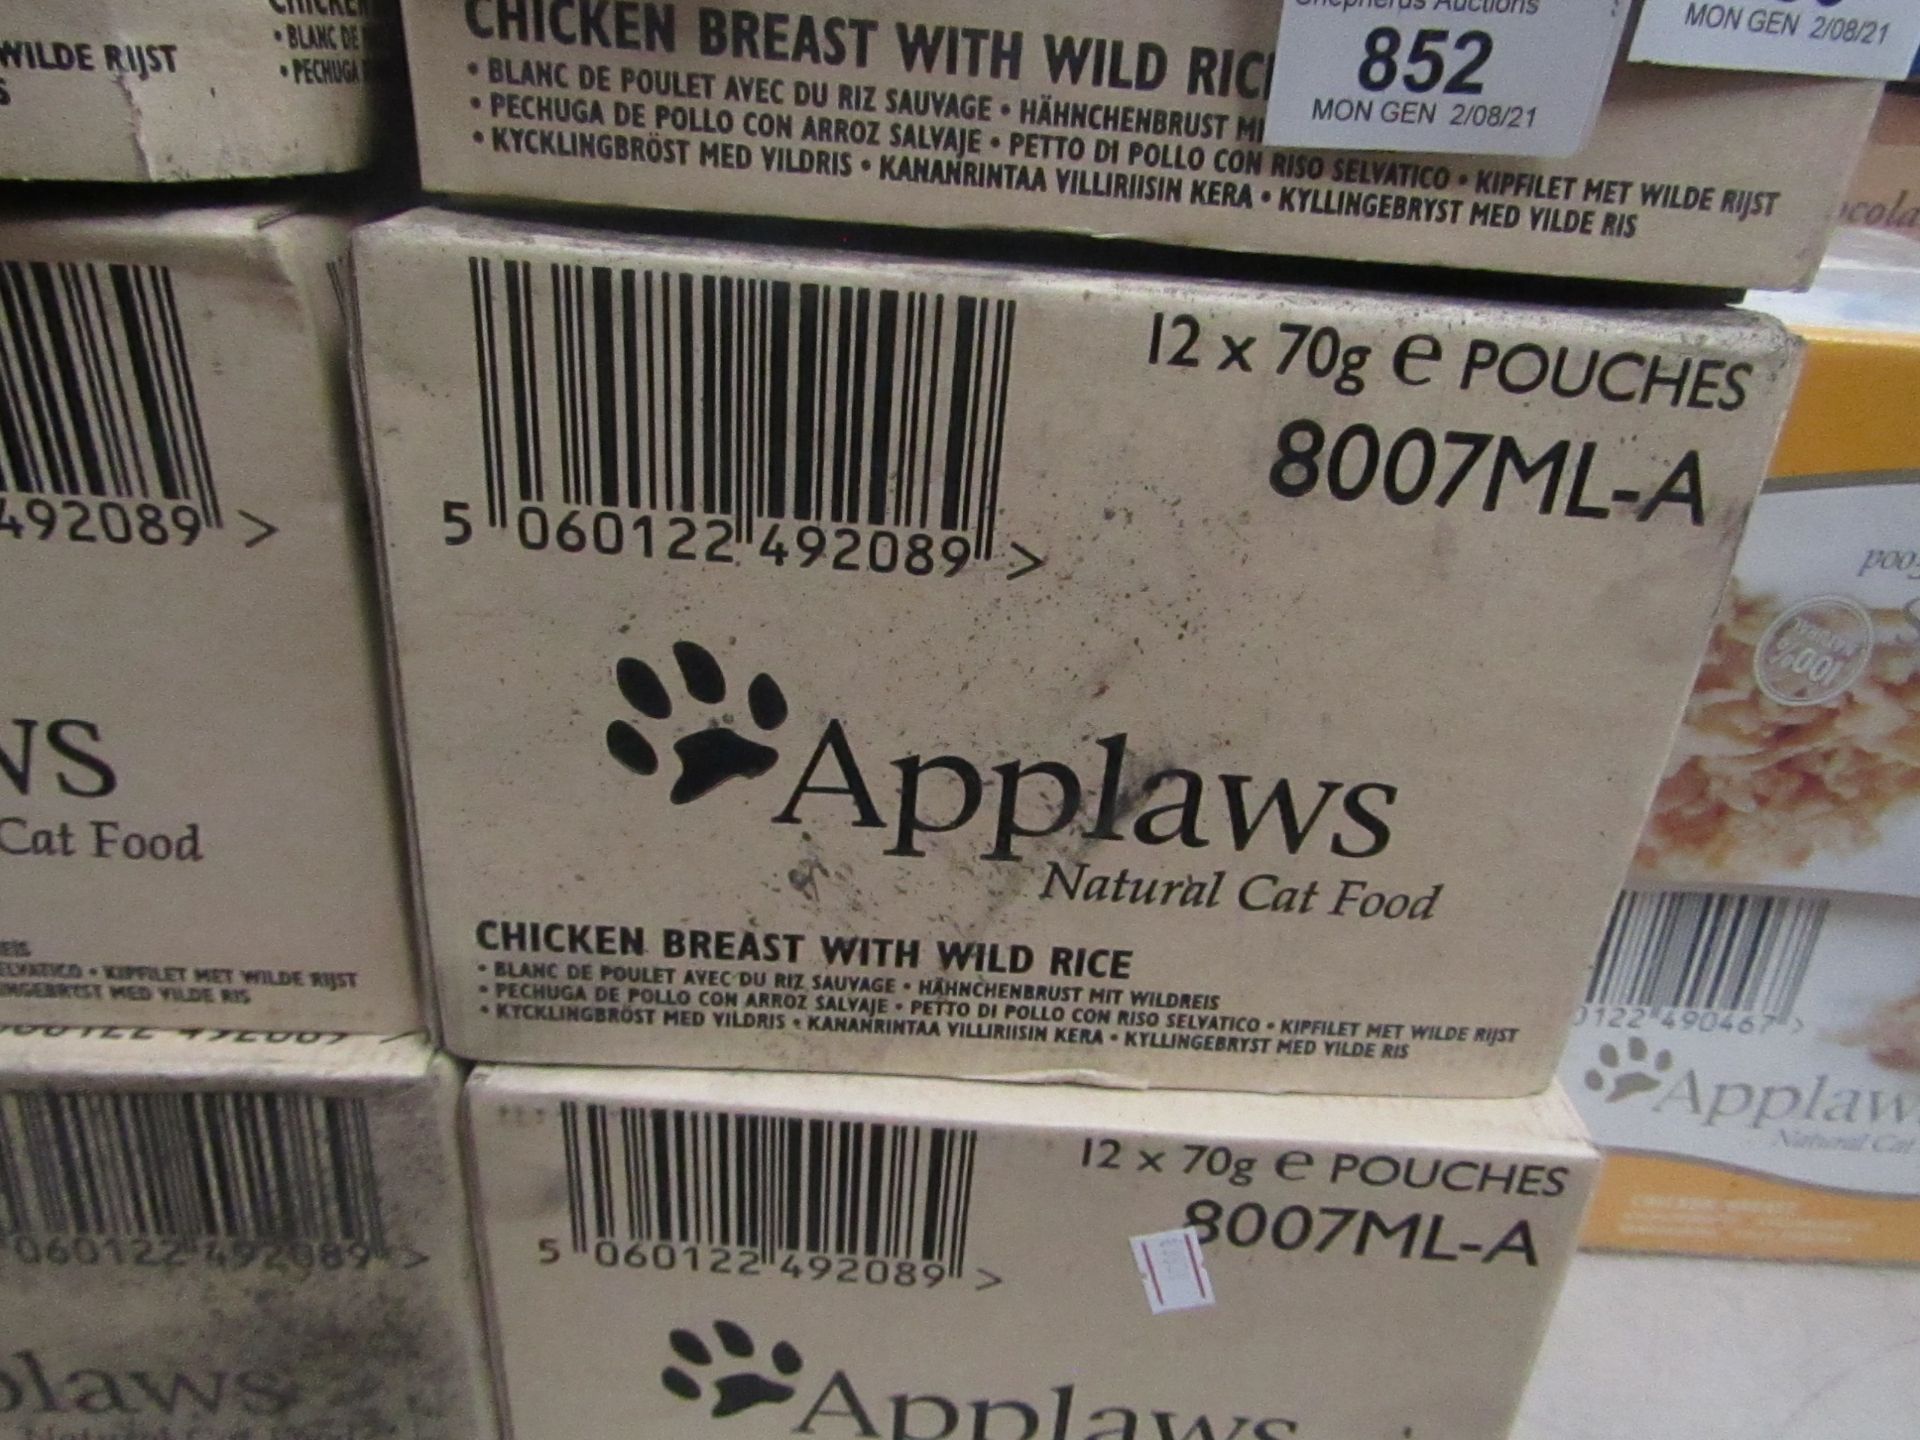 Applaws - Chicken Breast With Wild Rice Natural Cat Food ( 12x 70g Pouches) - BBD 2023.